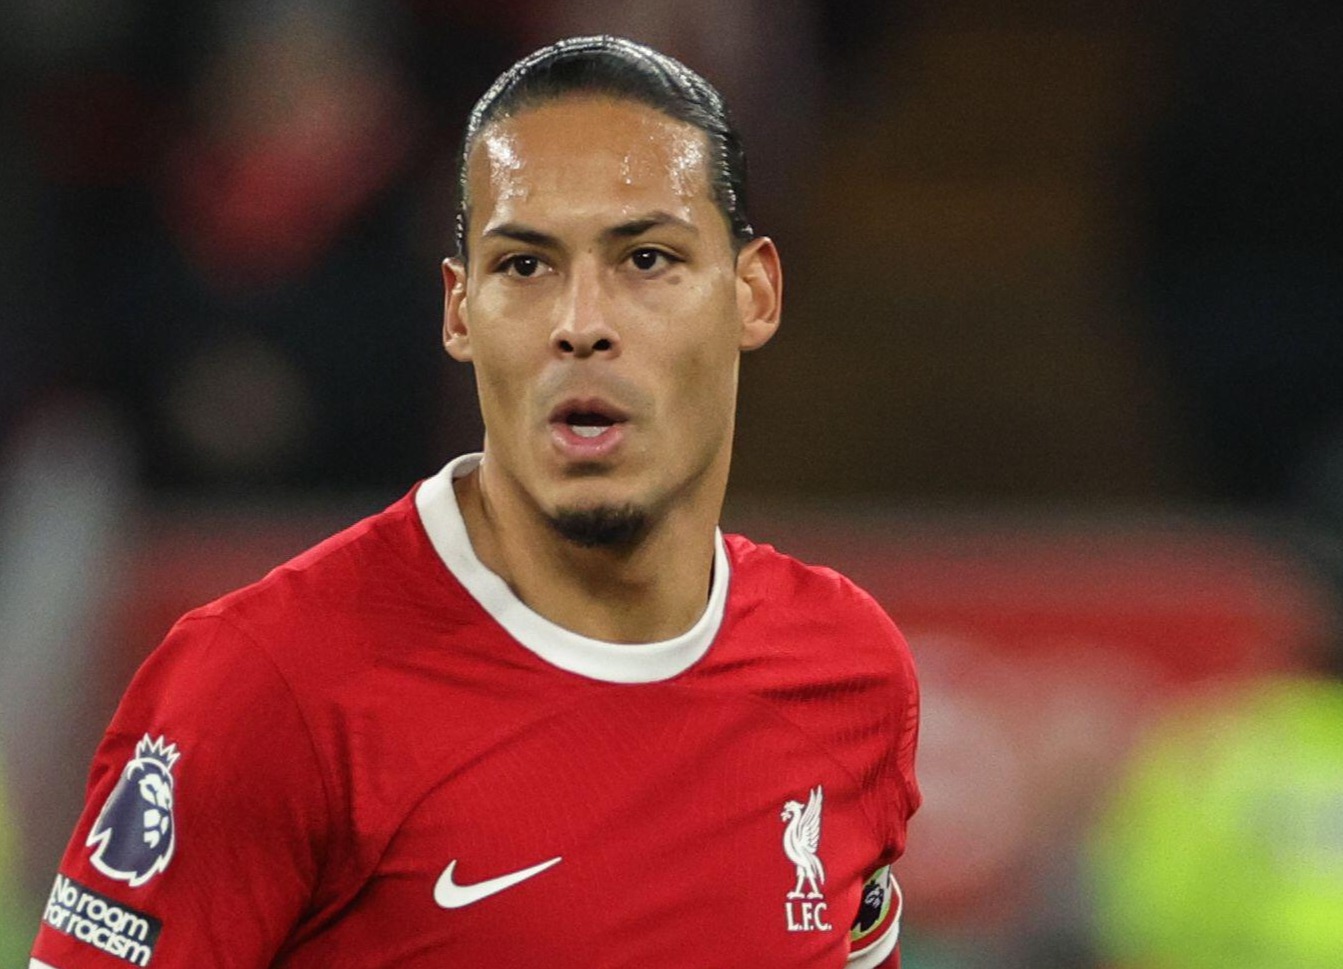 Virgil van Dijk ‘takes swipe at Andre Onana in tunnel after Liverpool clash and Man Utd star has perfect response’